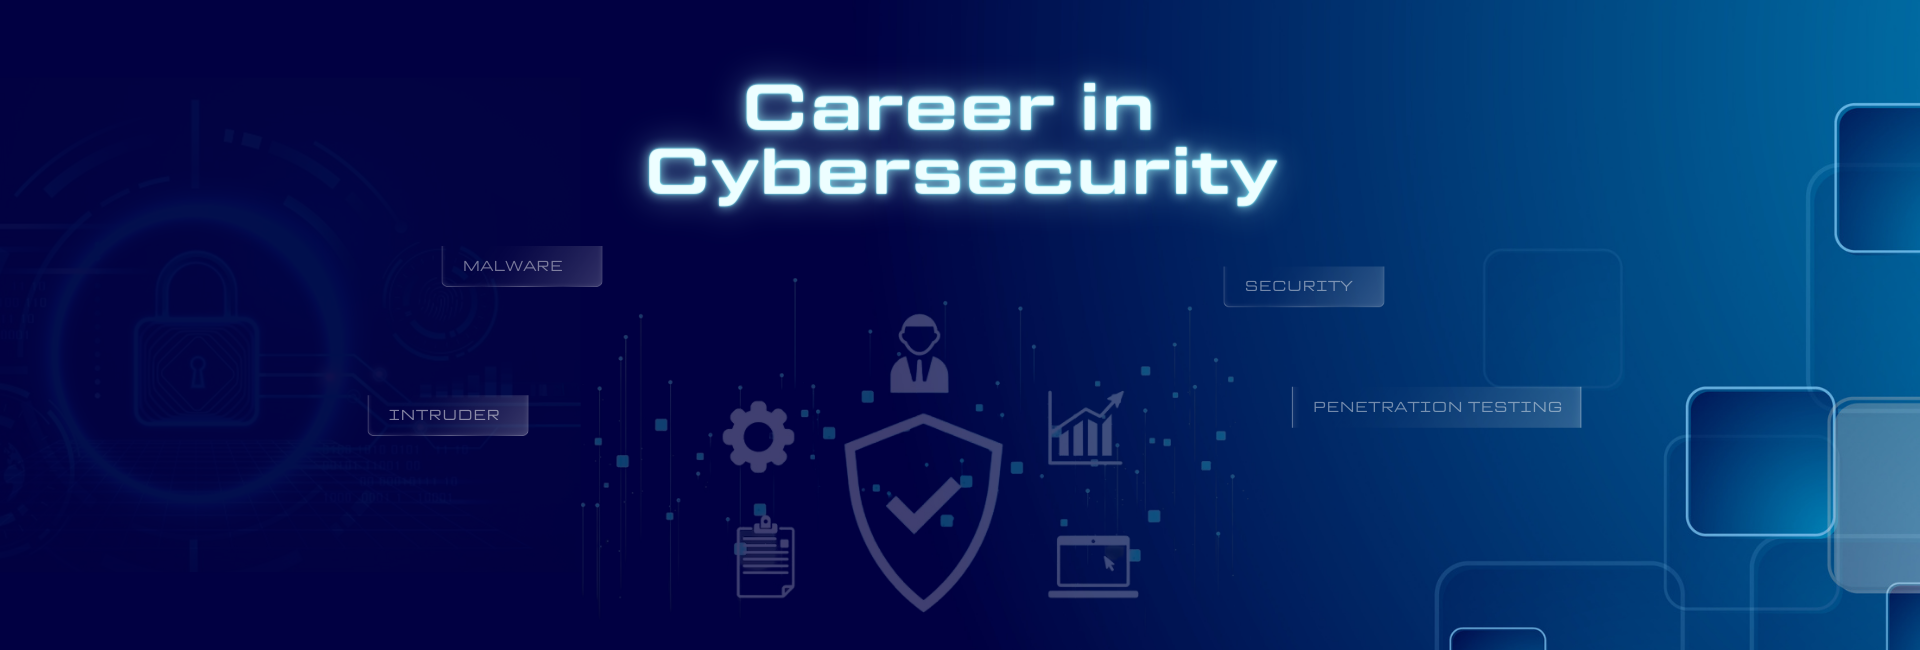 Building a career in cybersecurity